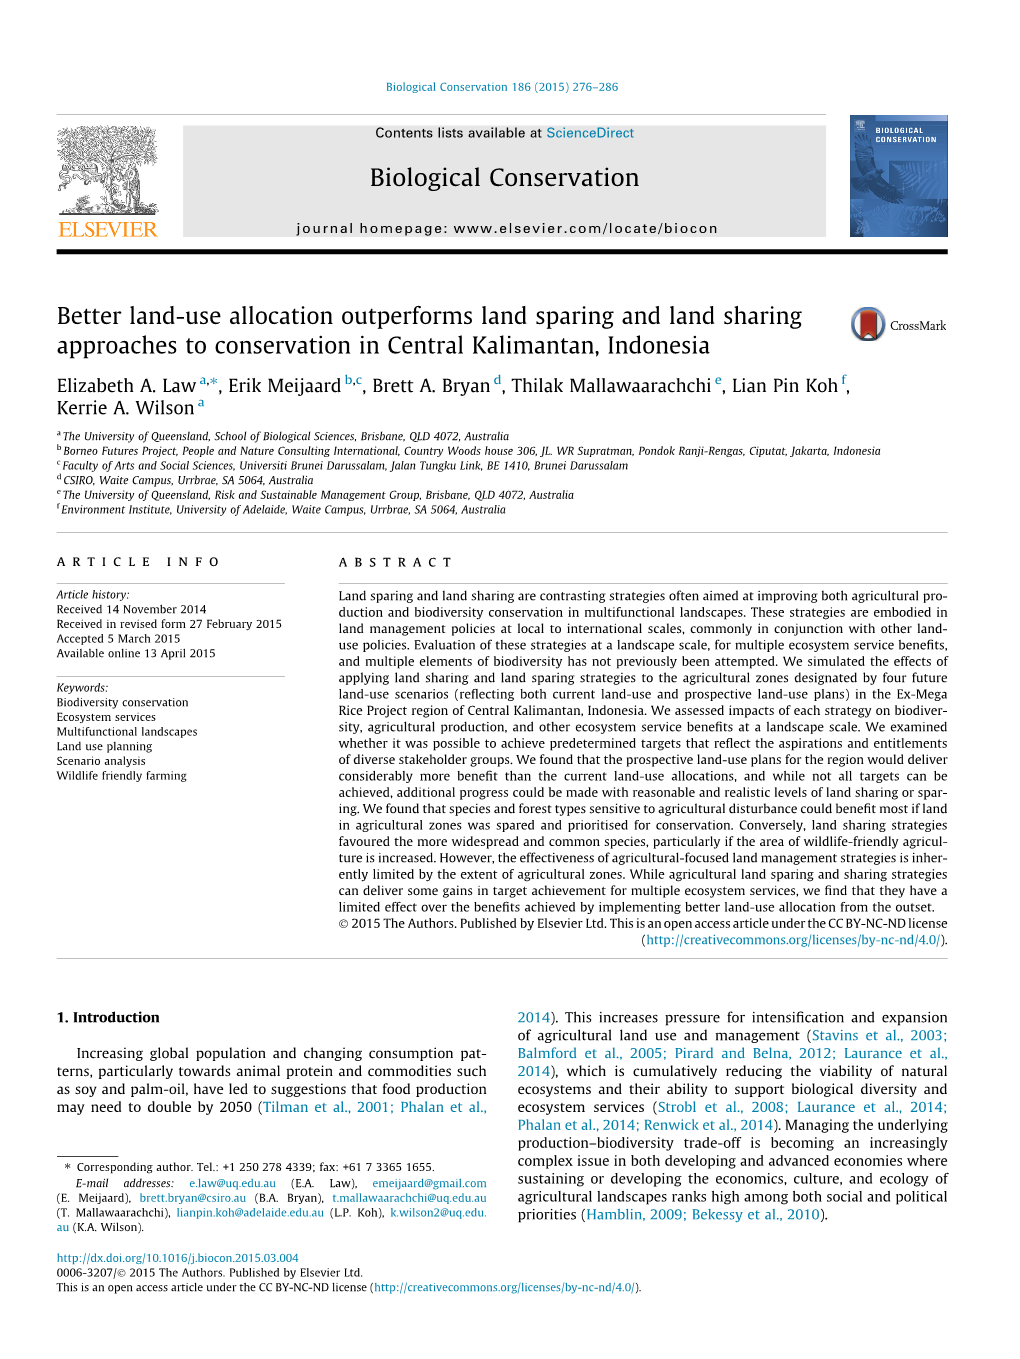 Better Land-Use Allocation Outperforms Land Sparing and Land Sharing Approaches to Conservation in Central Kalimantan, Indonesia ⇑ Elizabeth A